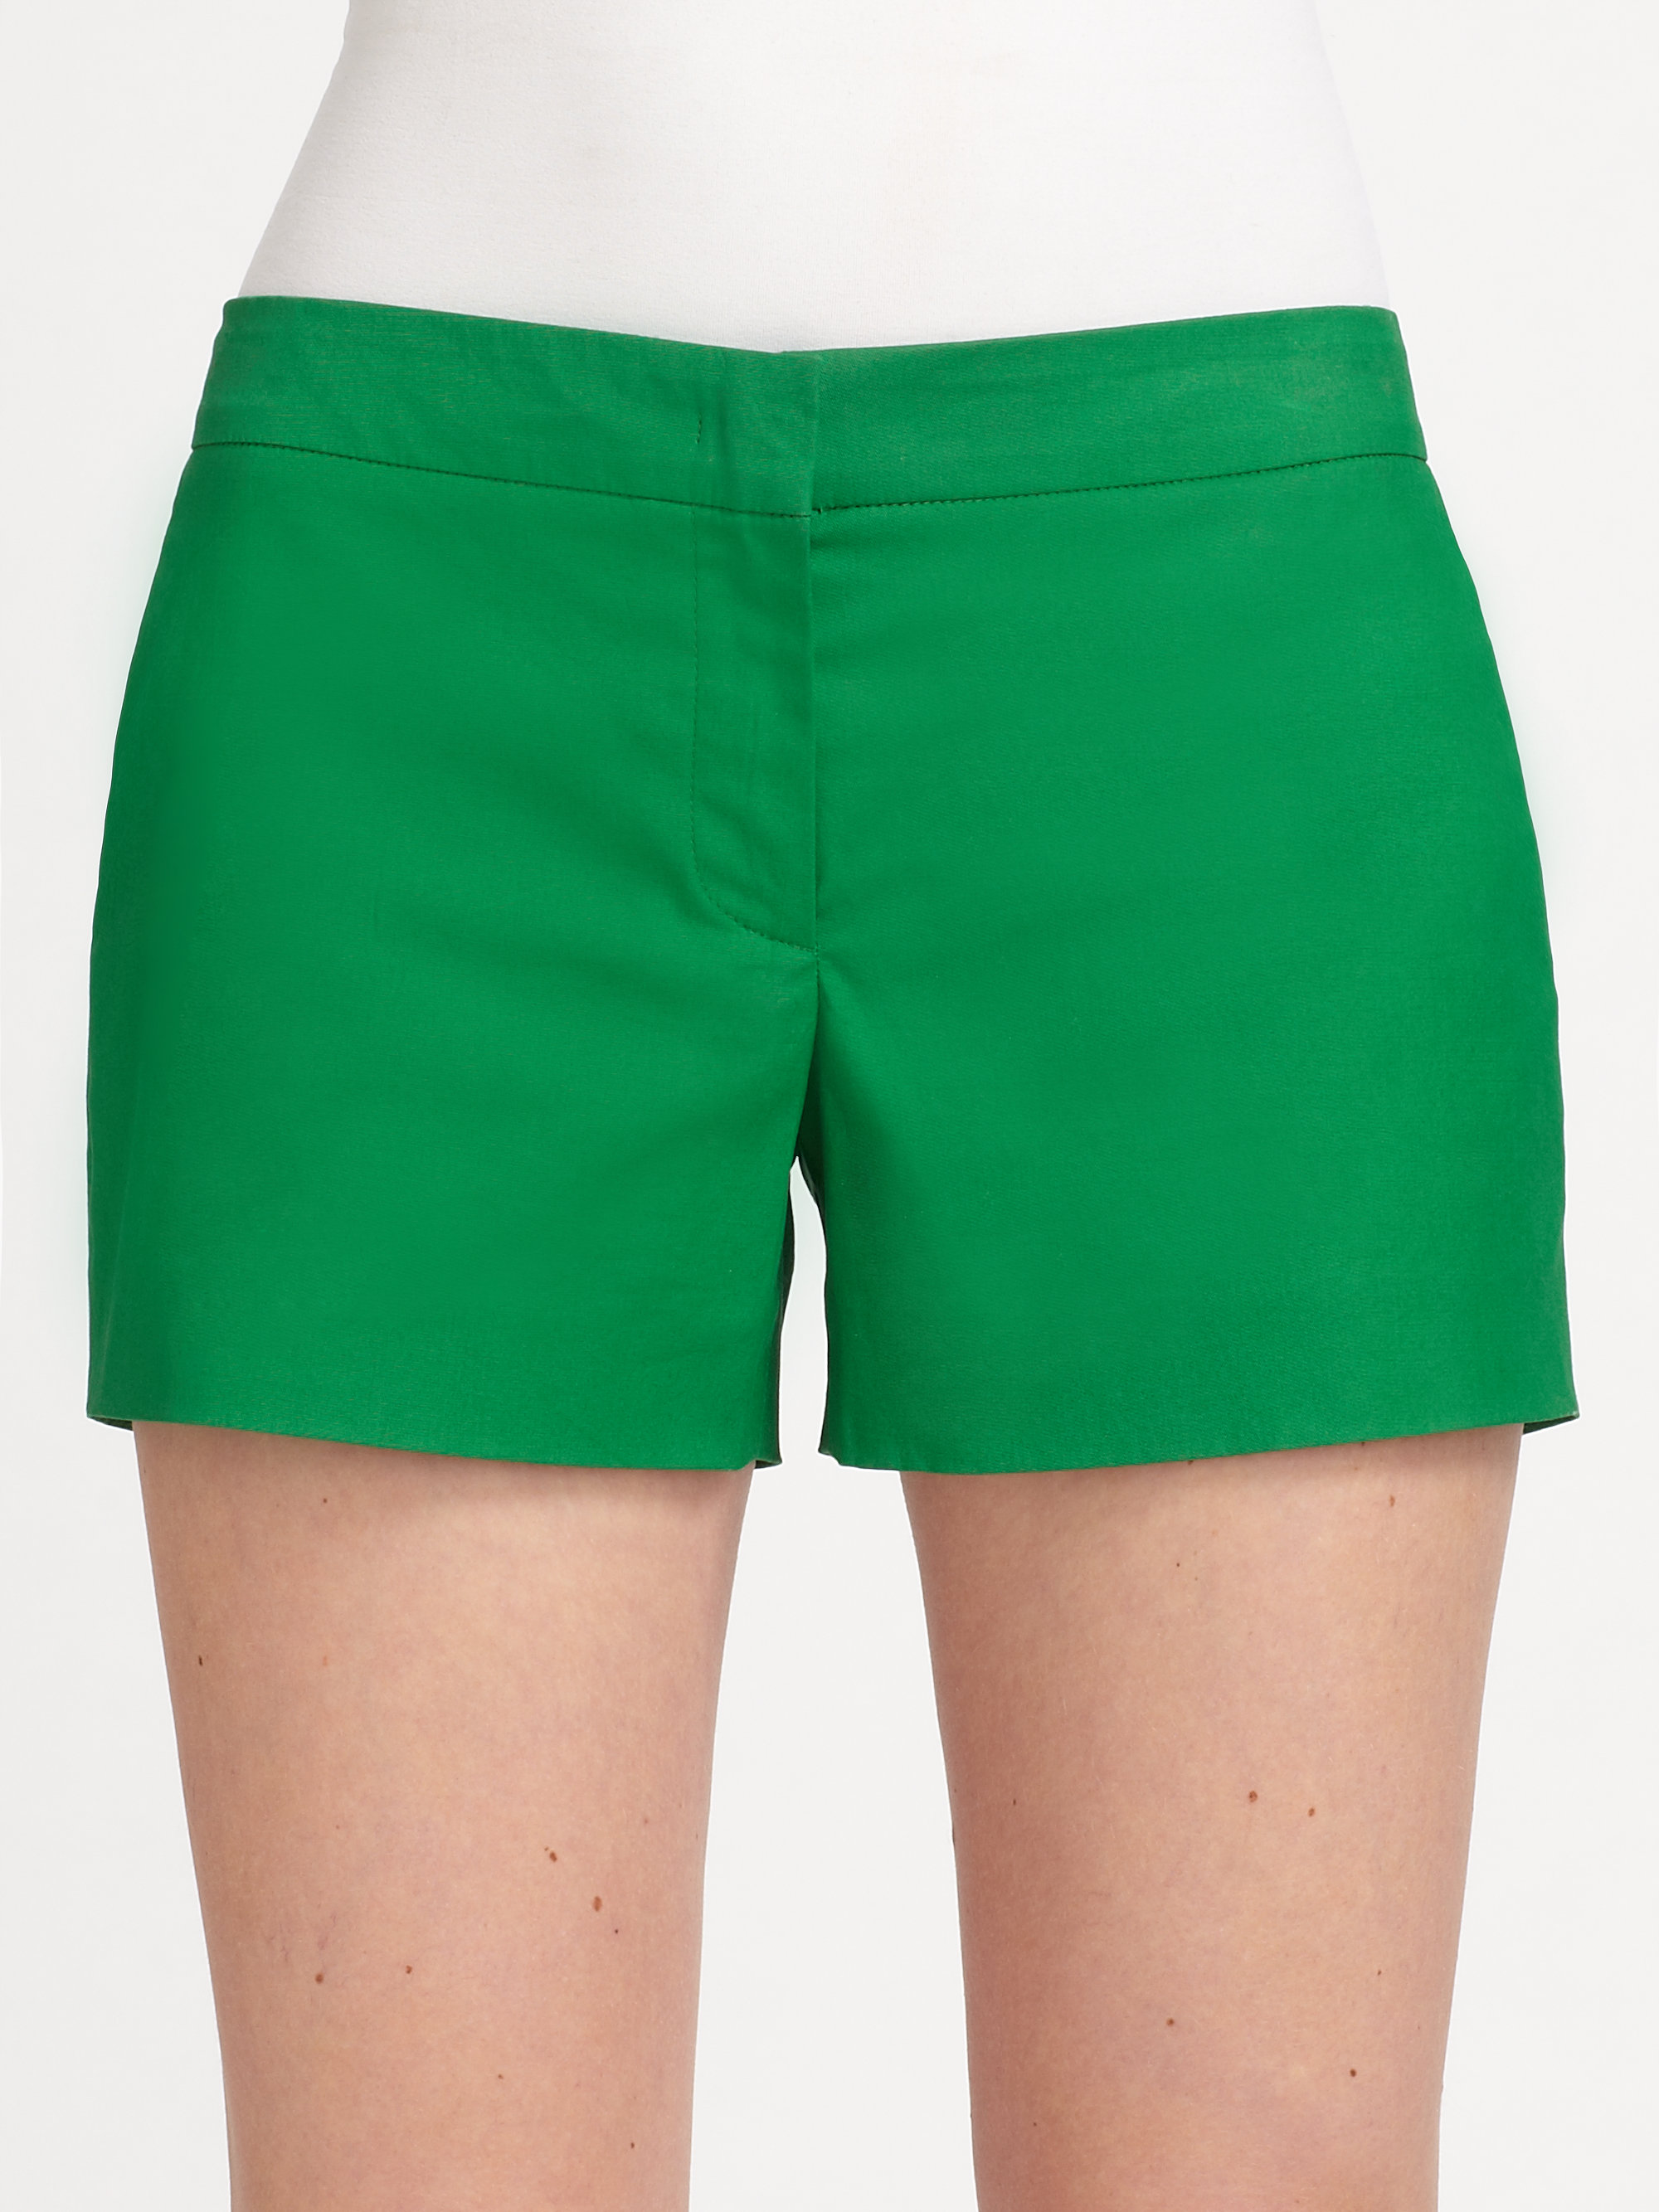 Lyst - Dkny Stretch Cotton Shorts in Green